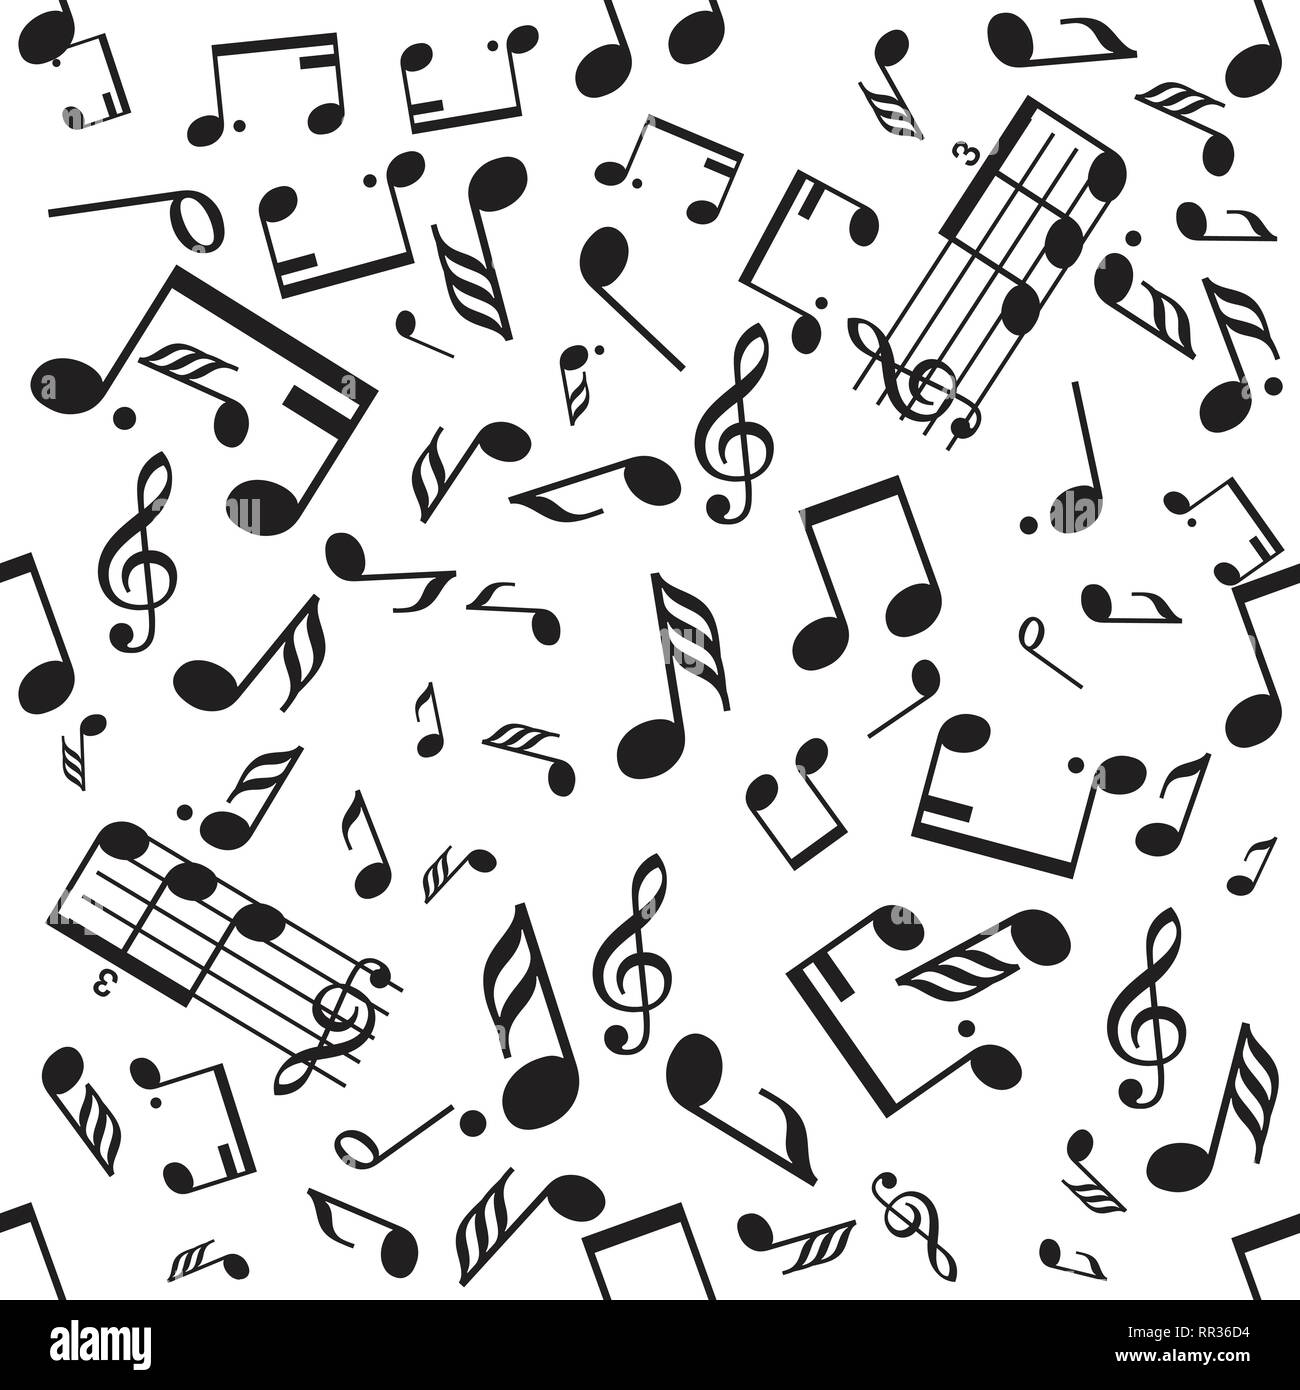 Seamless vector music notes symbols design pattern Stock Vector Image ...